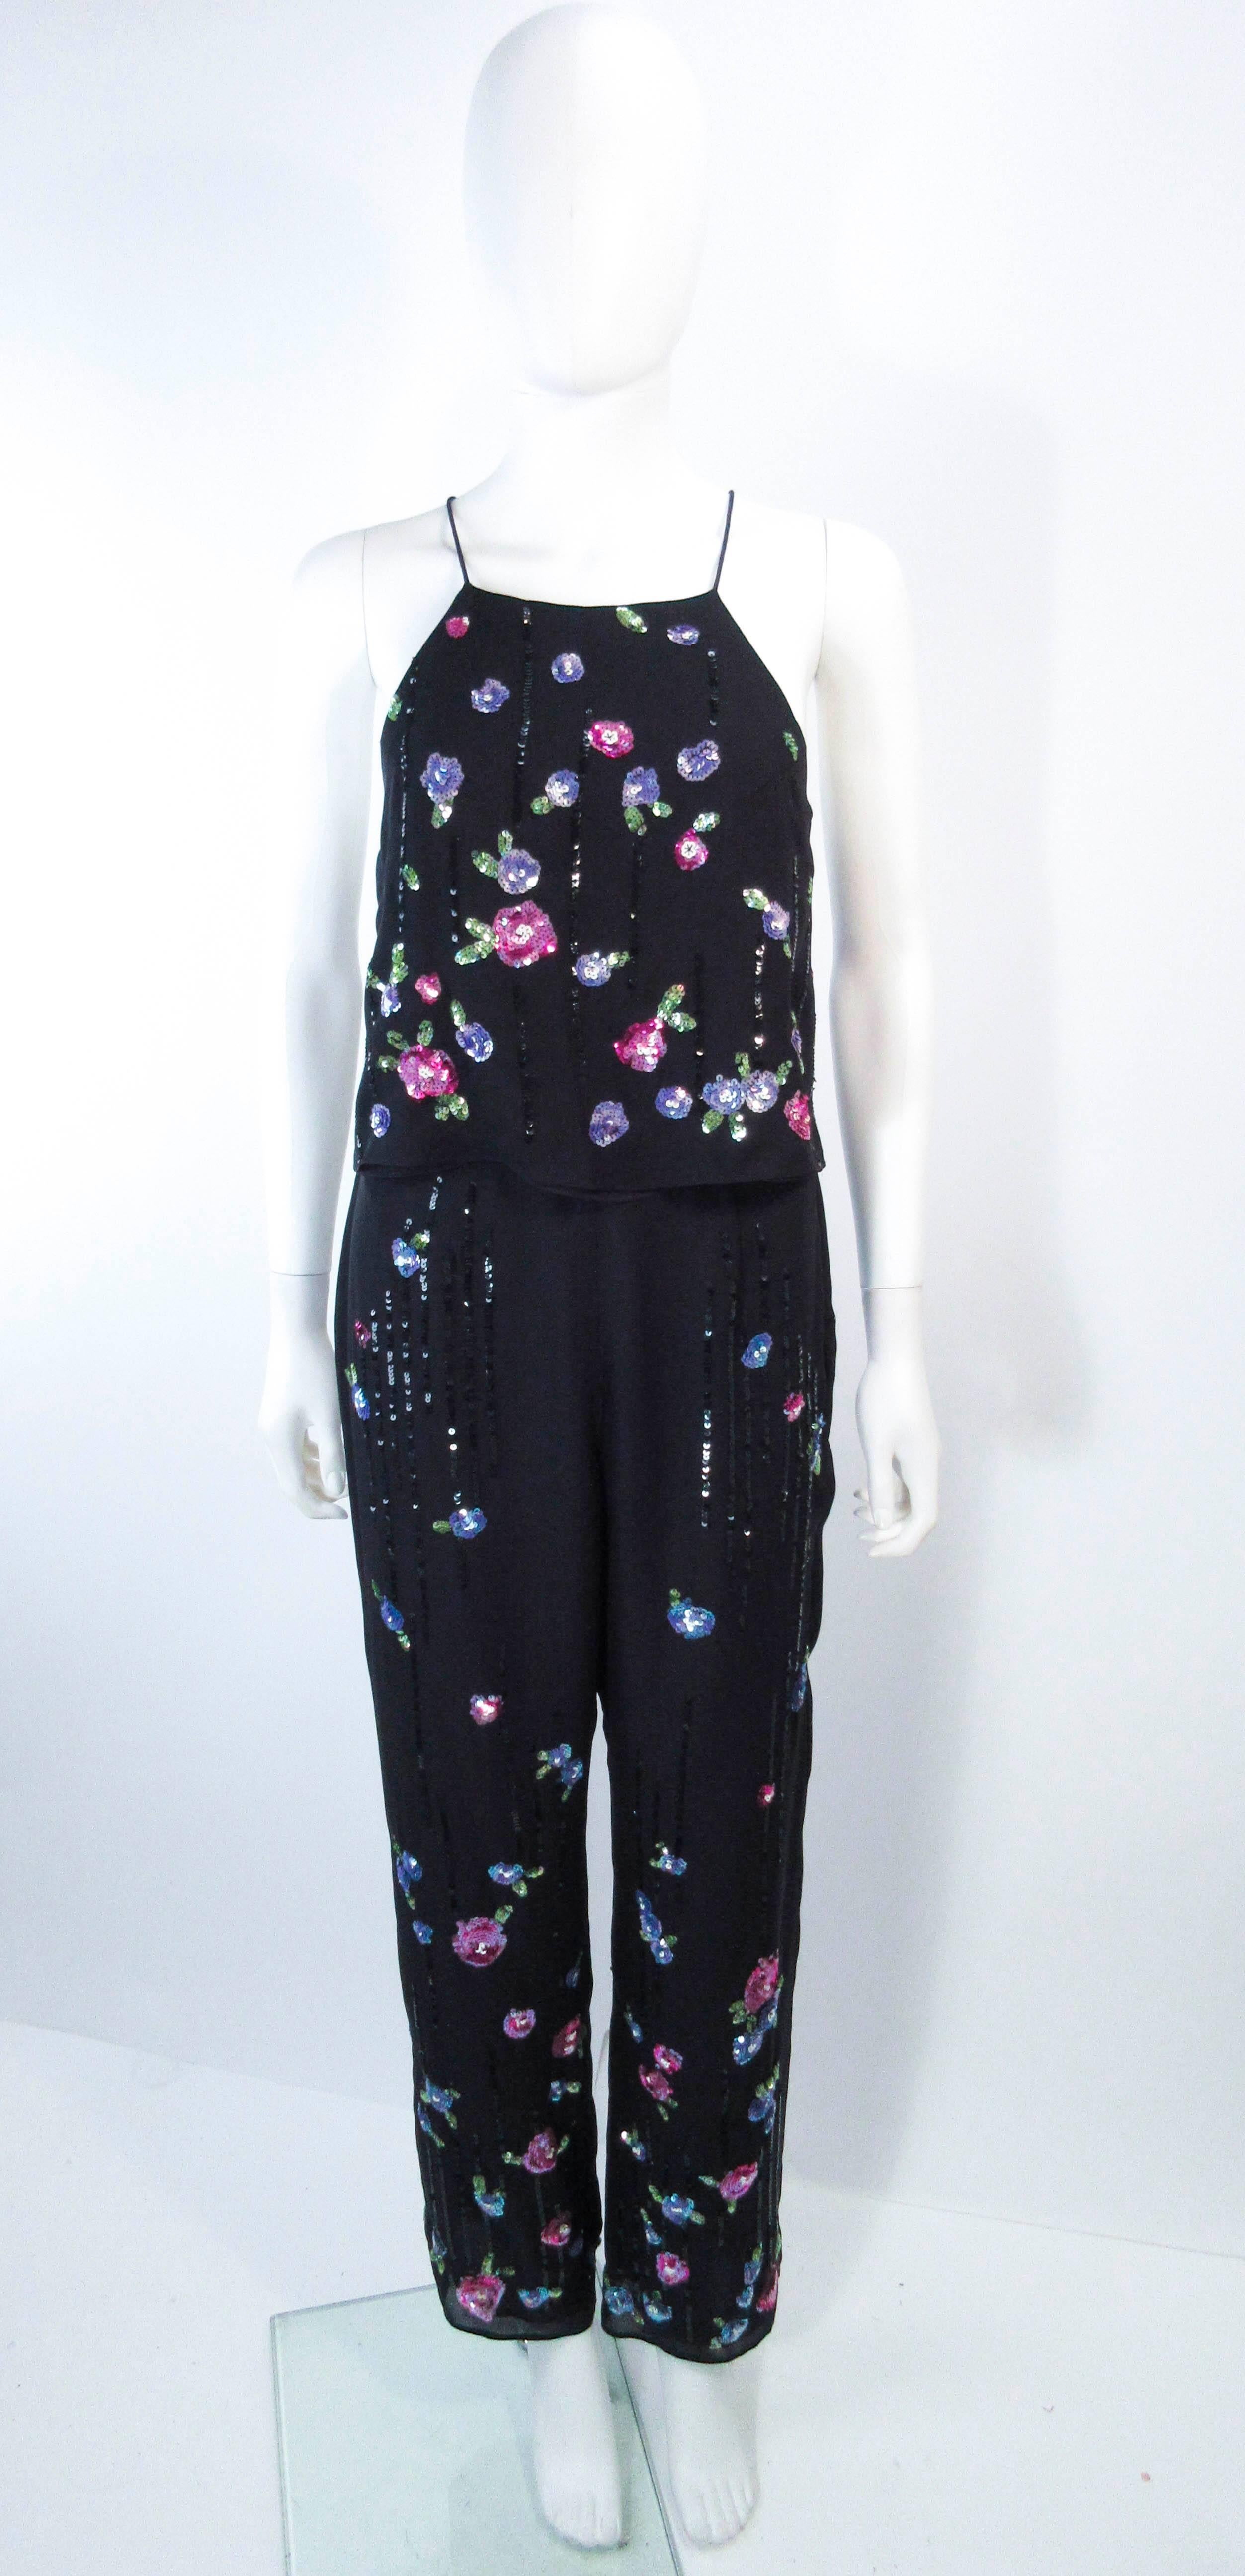 This Rimini set is composed of a black silk chiffon and features a sequin floral applique. The top is a tie style design and the pants have a nice slack style.  In great pre-owned condition (some signs of wear due to age).

**Please cross-reference